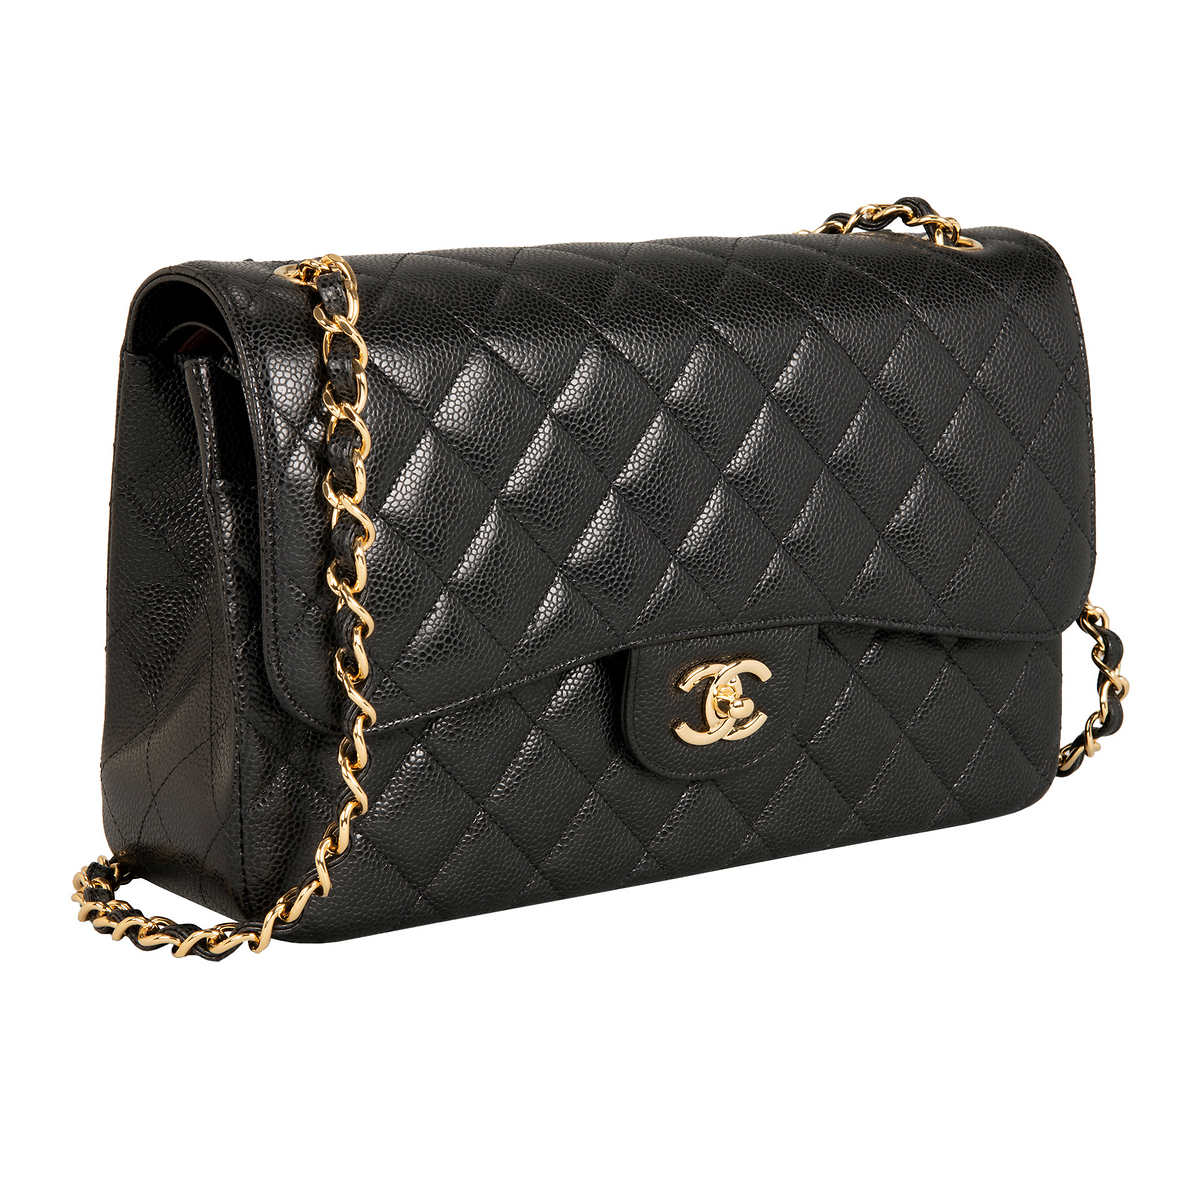 UNBOXING CHANEL CLASSIC MINI POUCH - BLACK GRAINED CALFSKIN AND